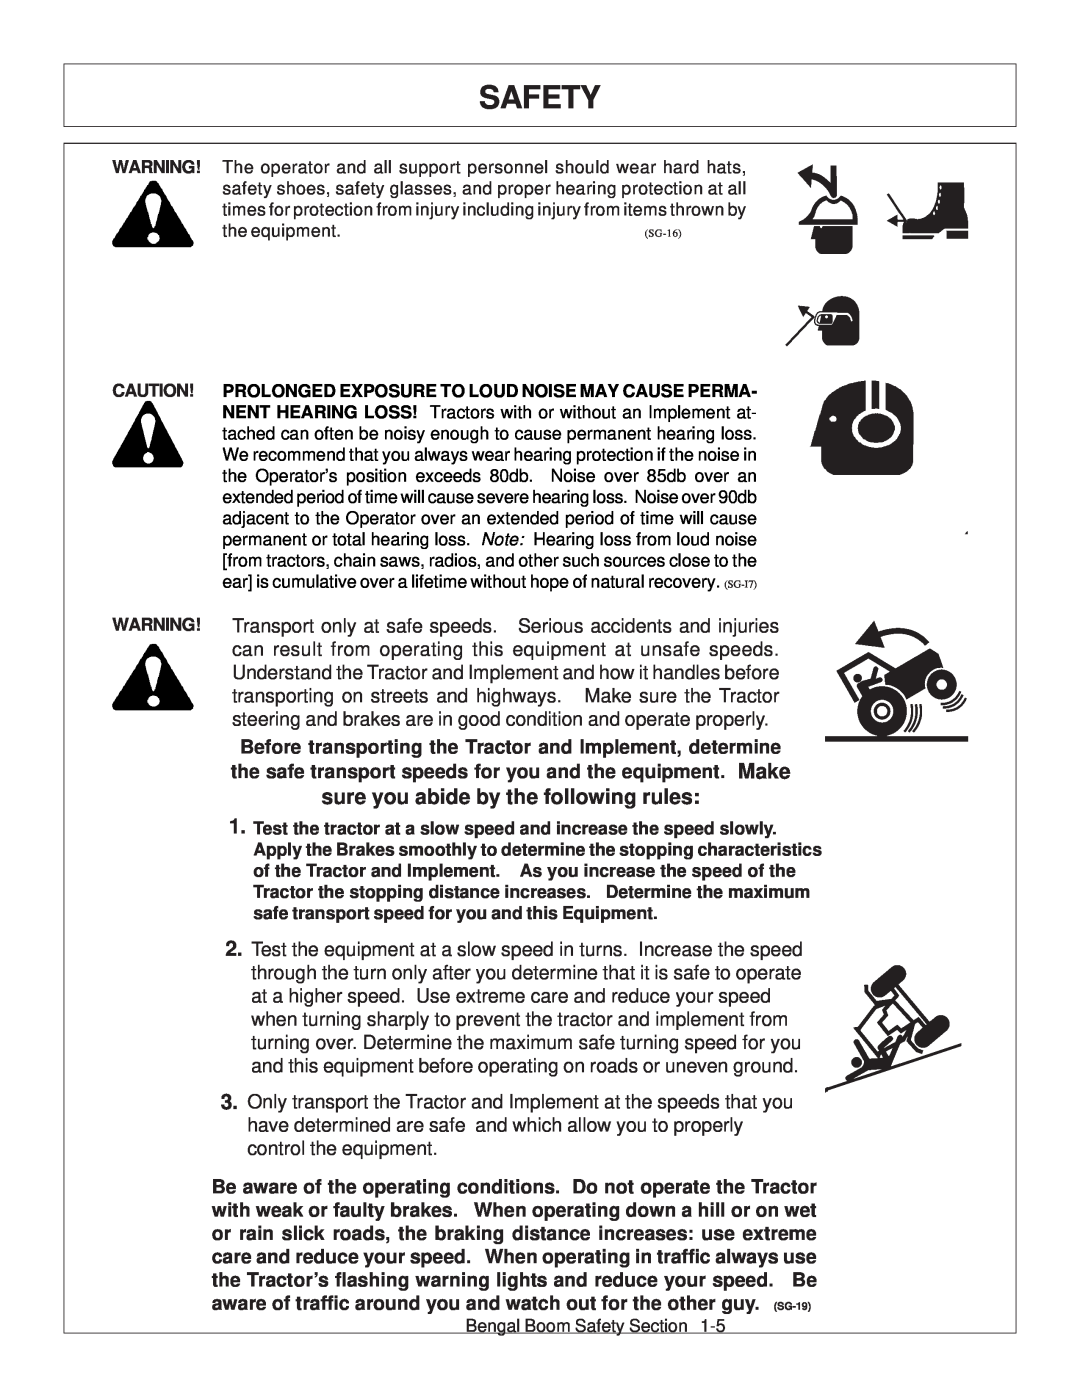 Tiger Products Co., Ltd 5101E, 5083E, 5093E manual sure you abide by the following rules, Bengal Boom Safety Section 